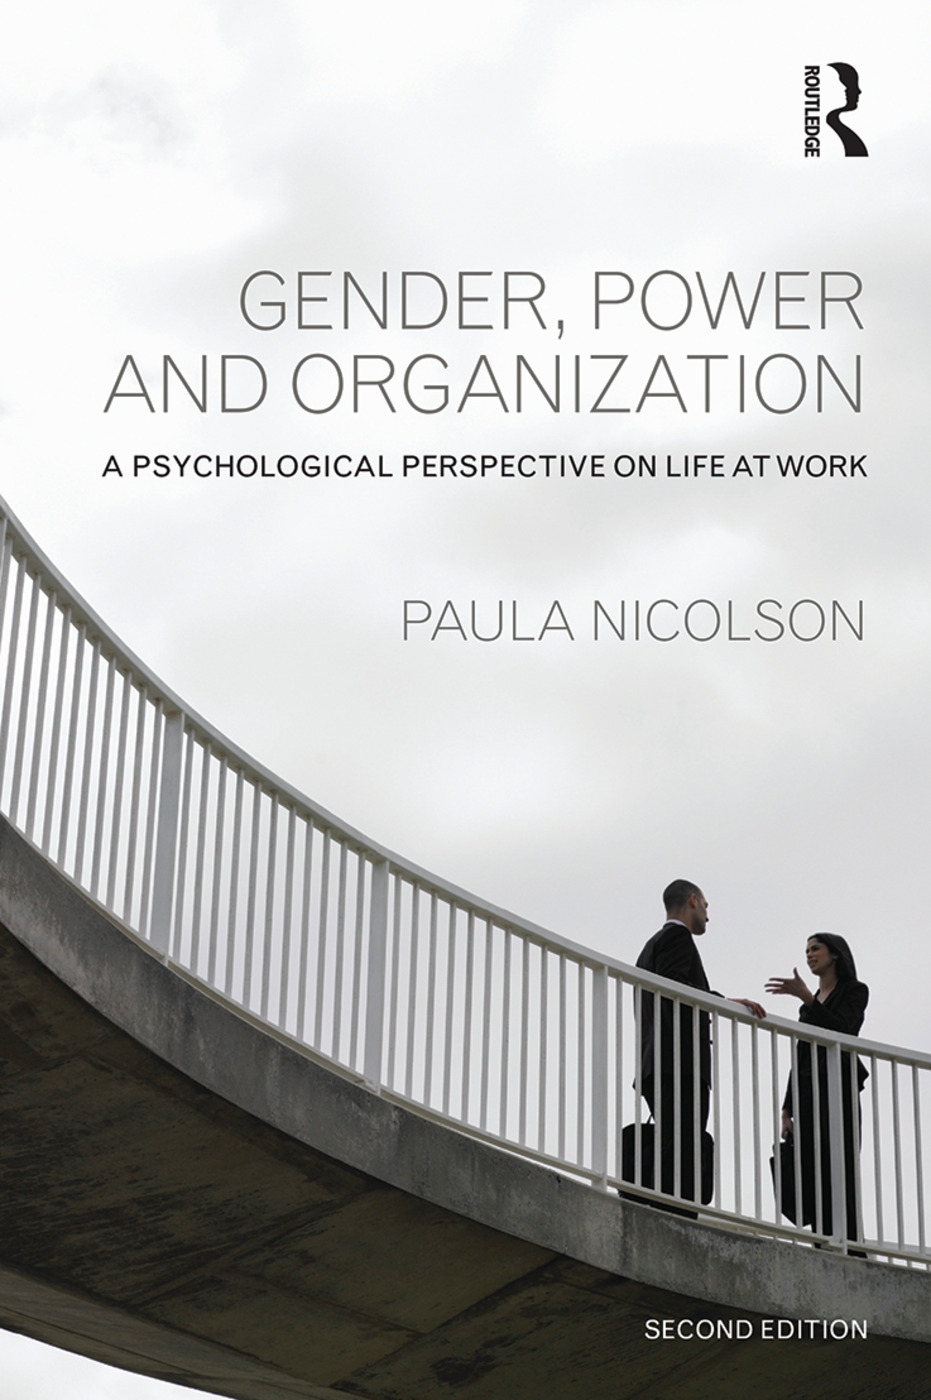 Gender, Power and Organization: A Psychological Perspective on Life at Work